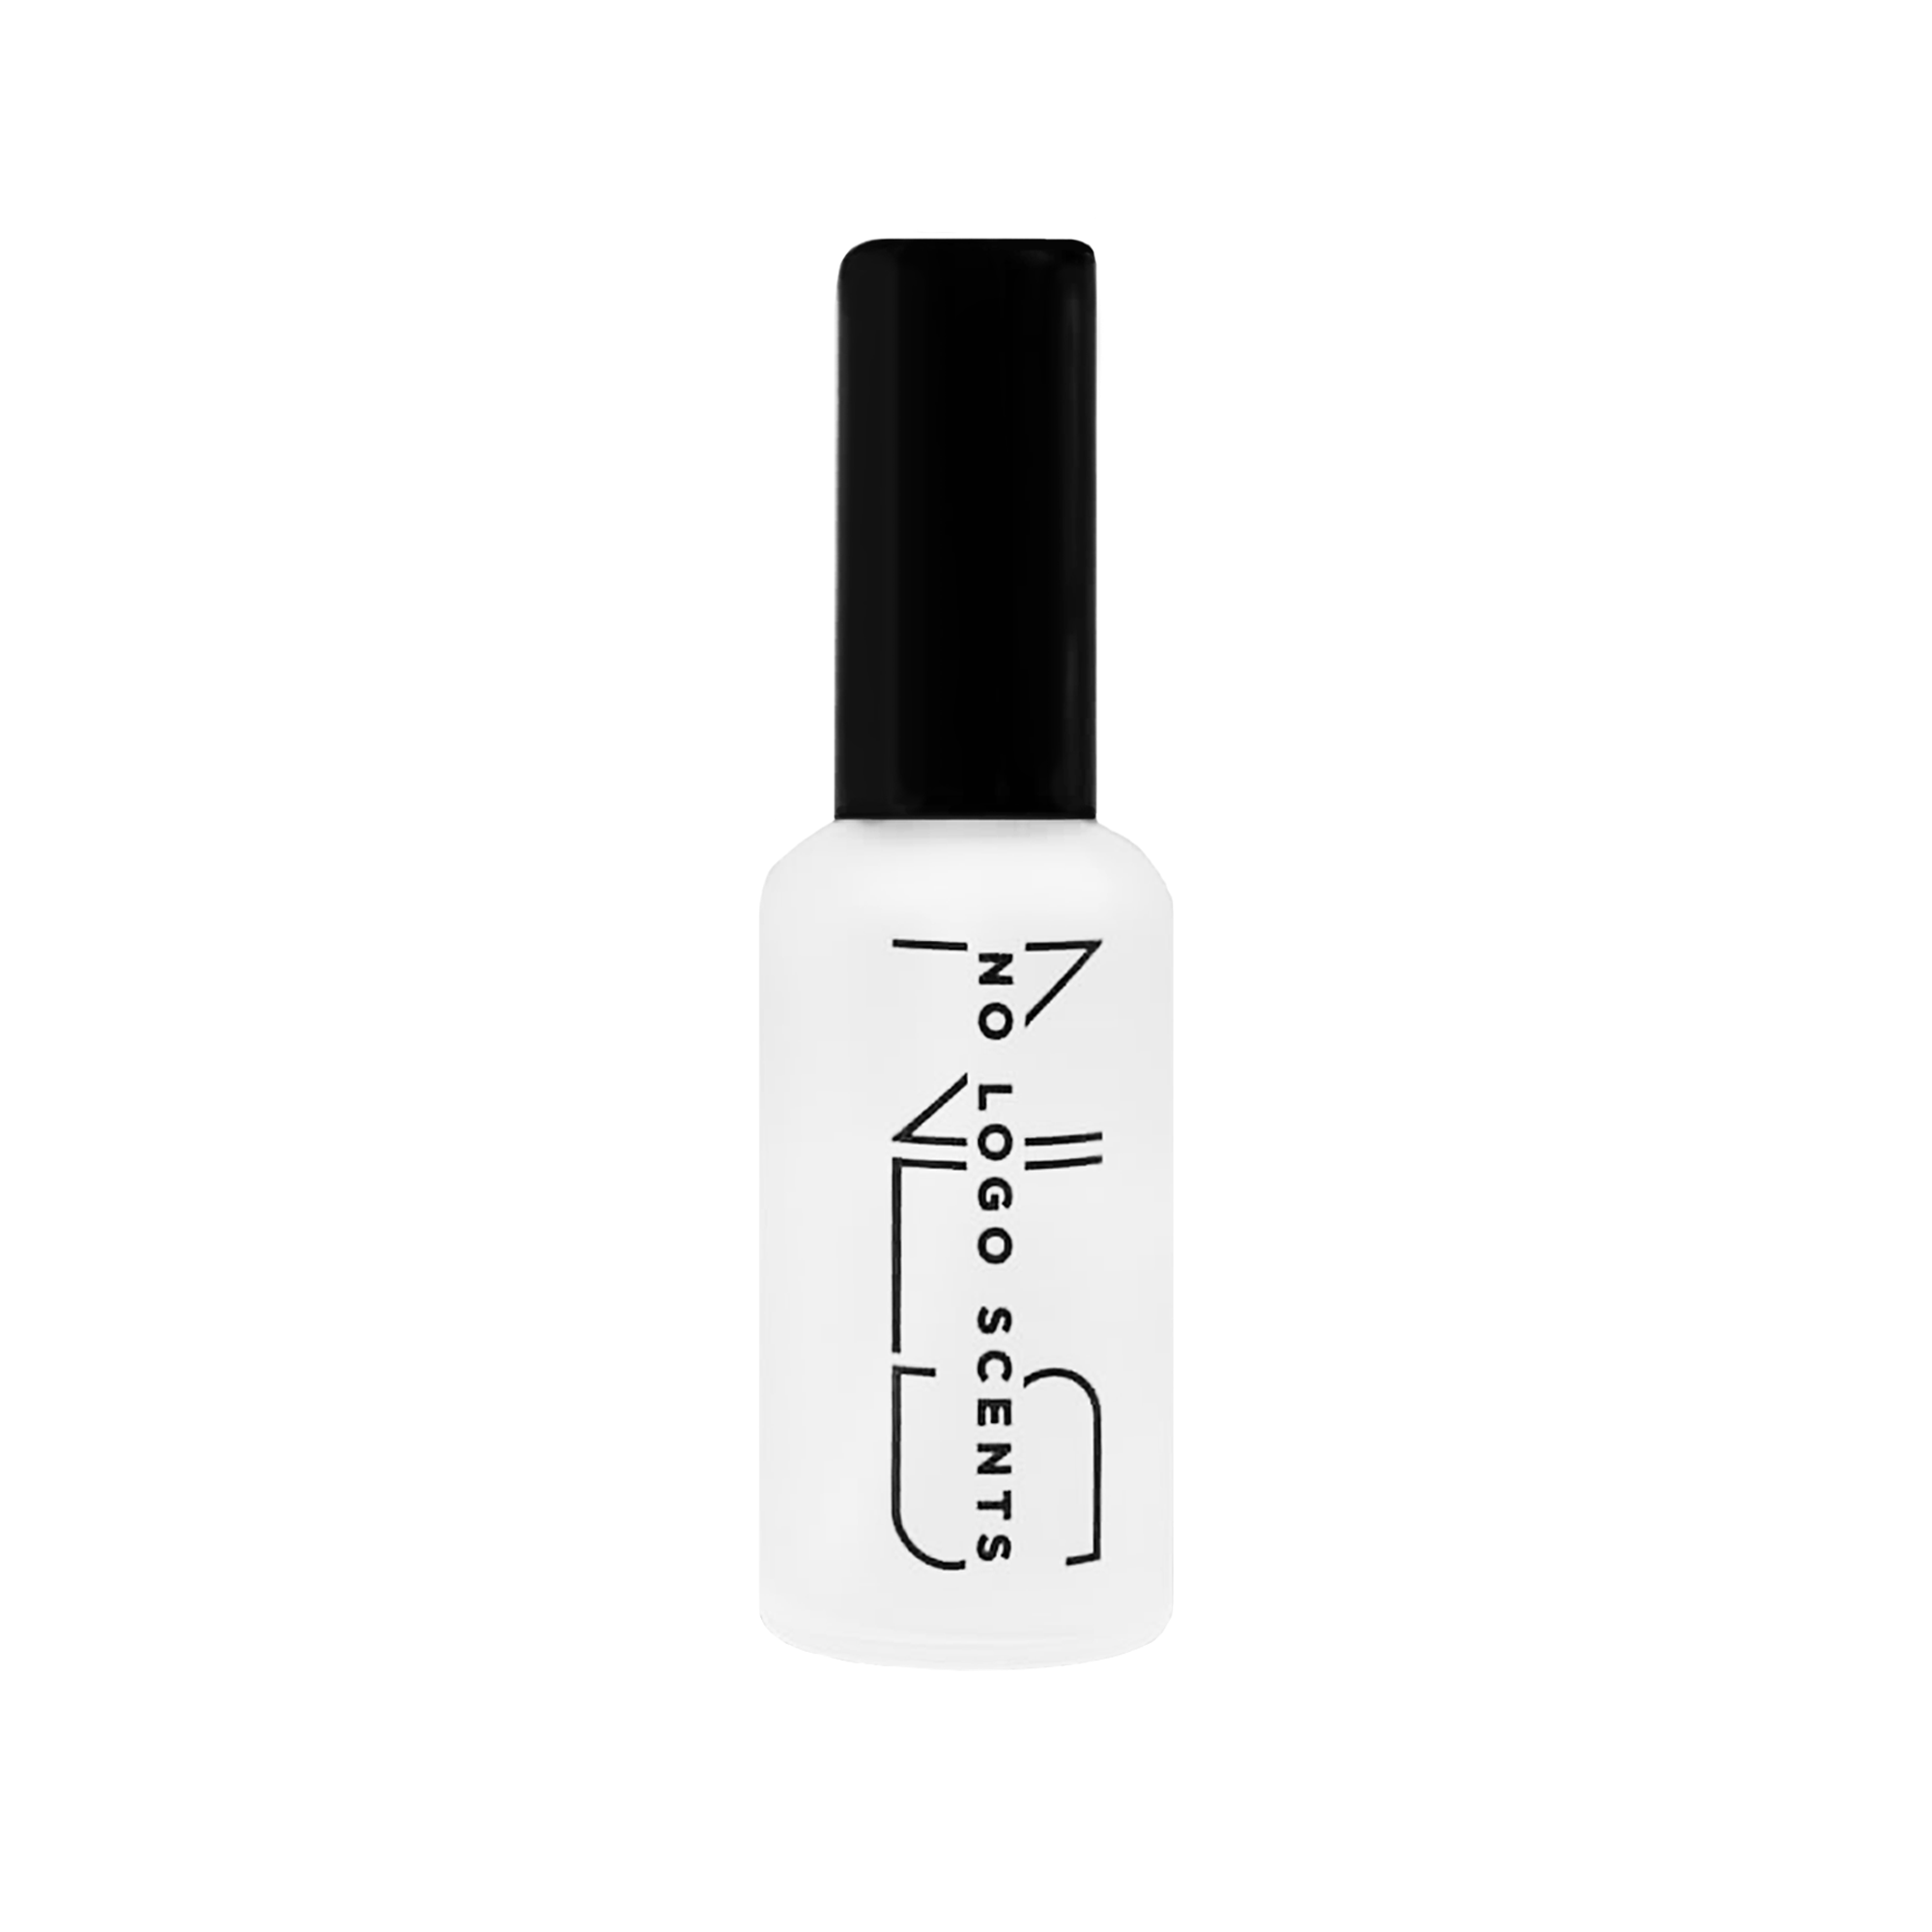 No.109 – INSPIRED BY BLACK POMEGRANATE from category UNISEX PERFUMES - 2